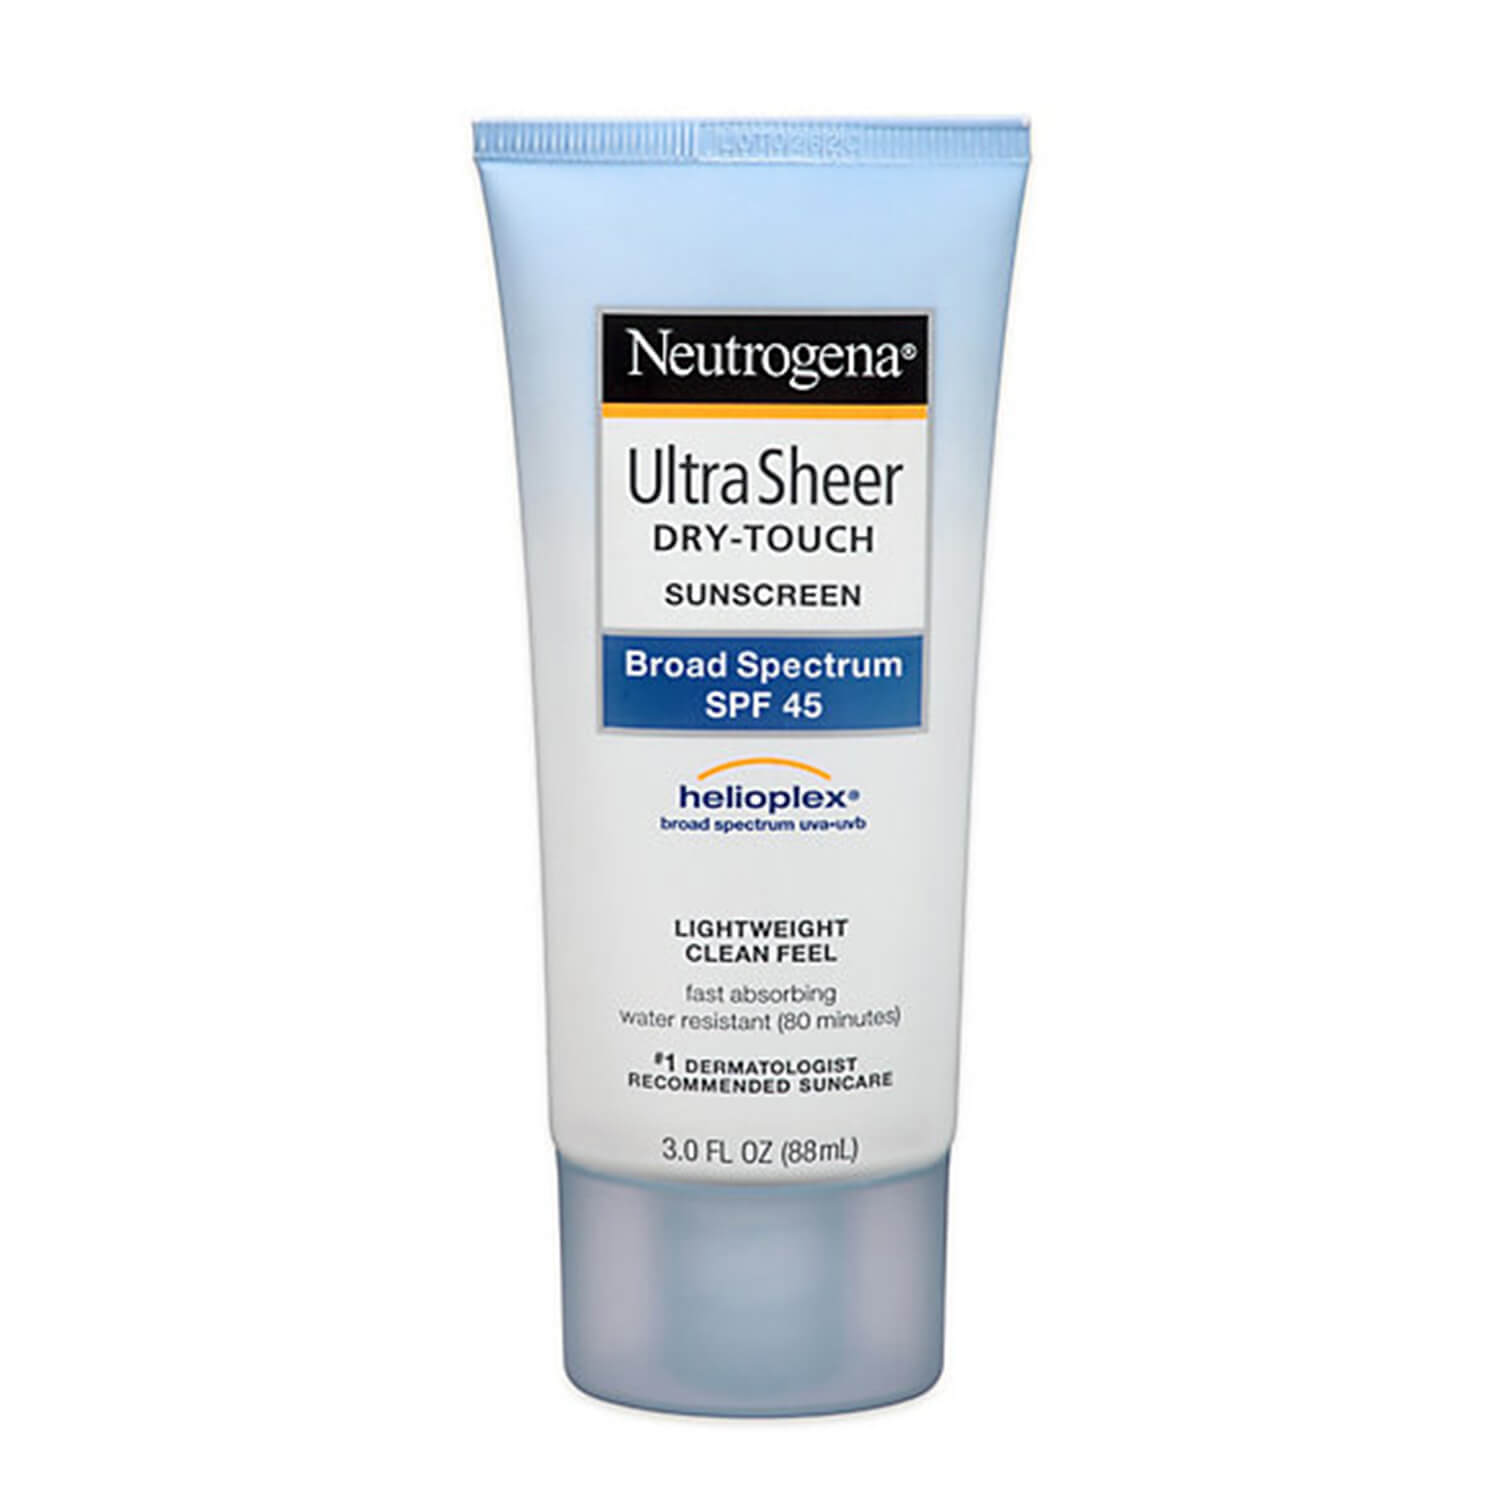 neutrogena ulta sheer spf 45 sunscreen available at heygirl.pk for delivery in Pakistan